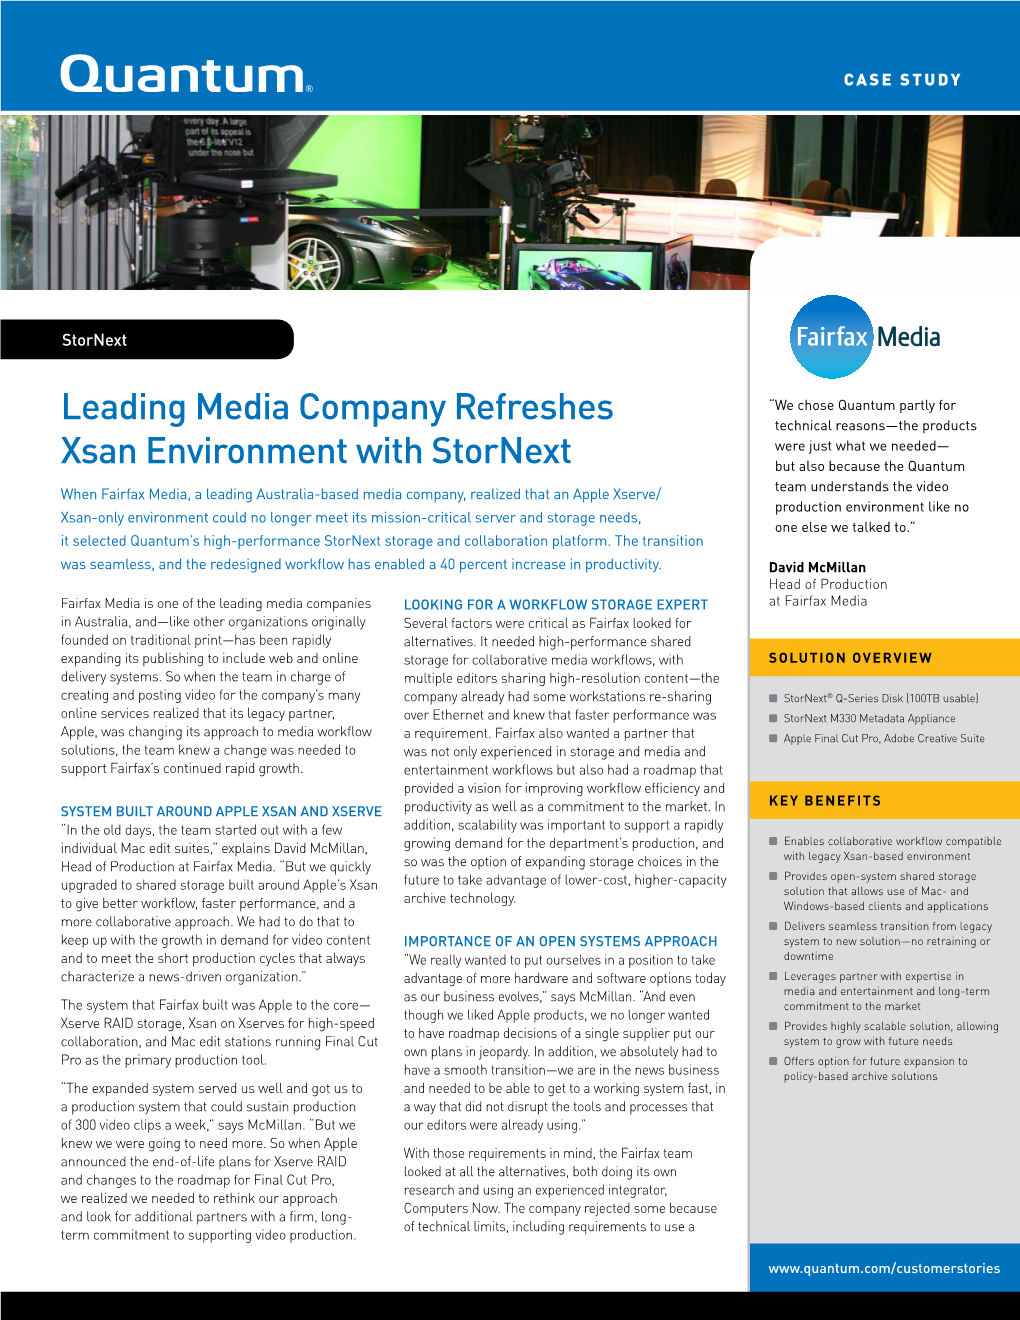 Leading Media Company Refreshes Xsan Environment with Stornext